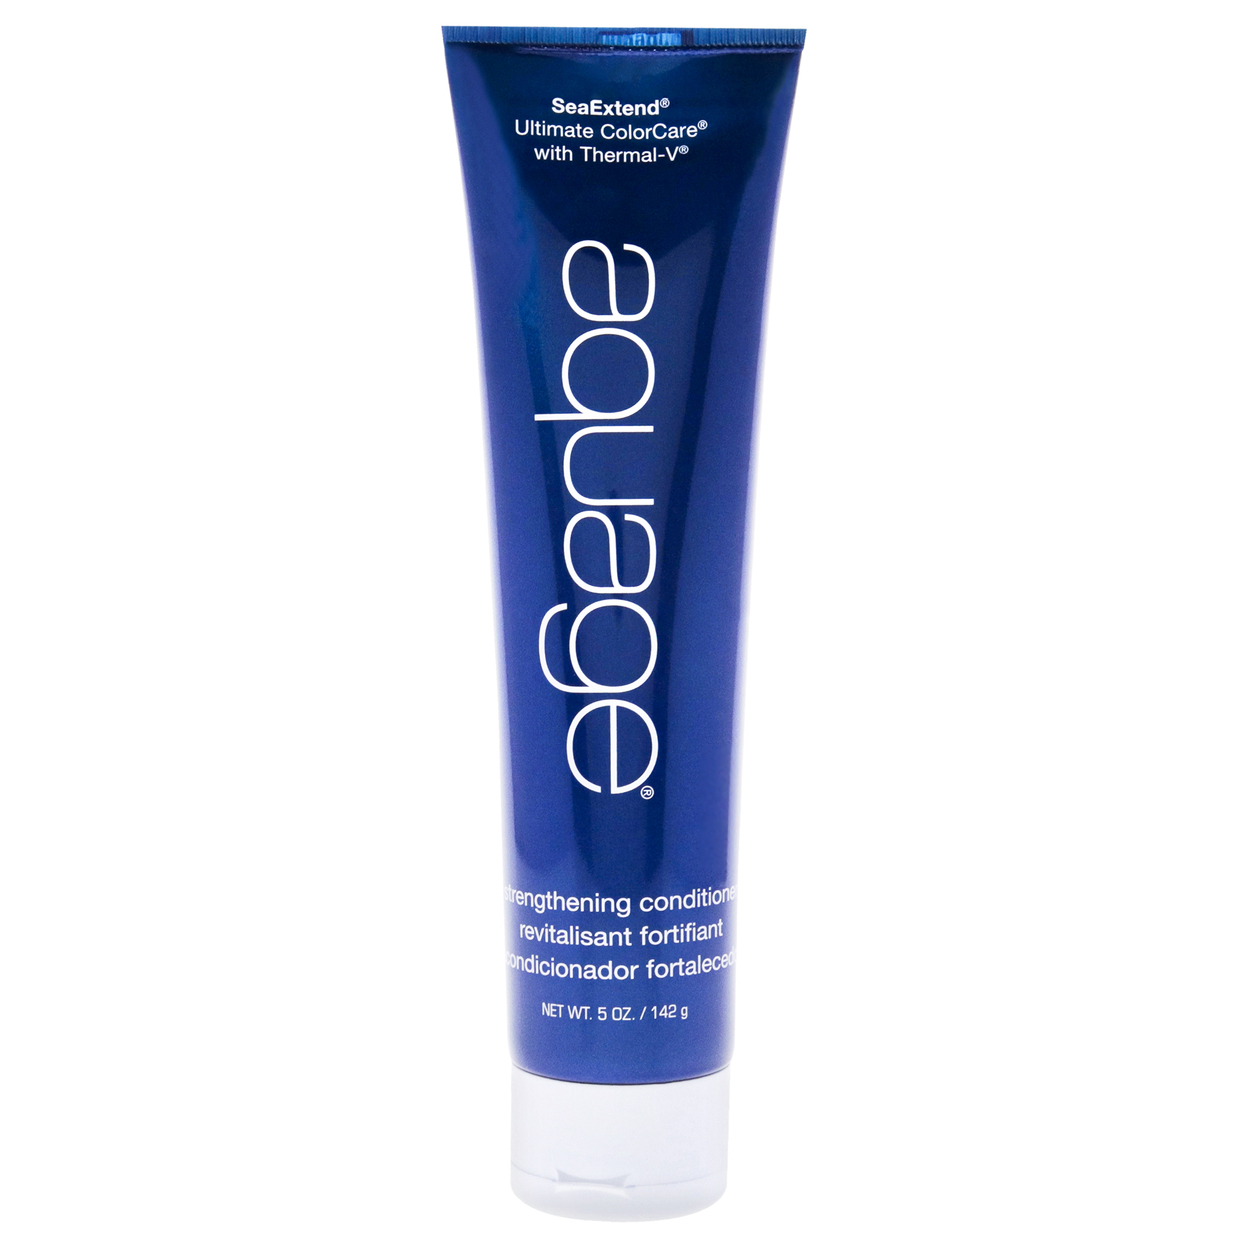 Aquage Seaextend Ultimate Colorcare With Thermal-V Strengthening Conditioner Conditioner 5 Oz